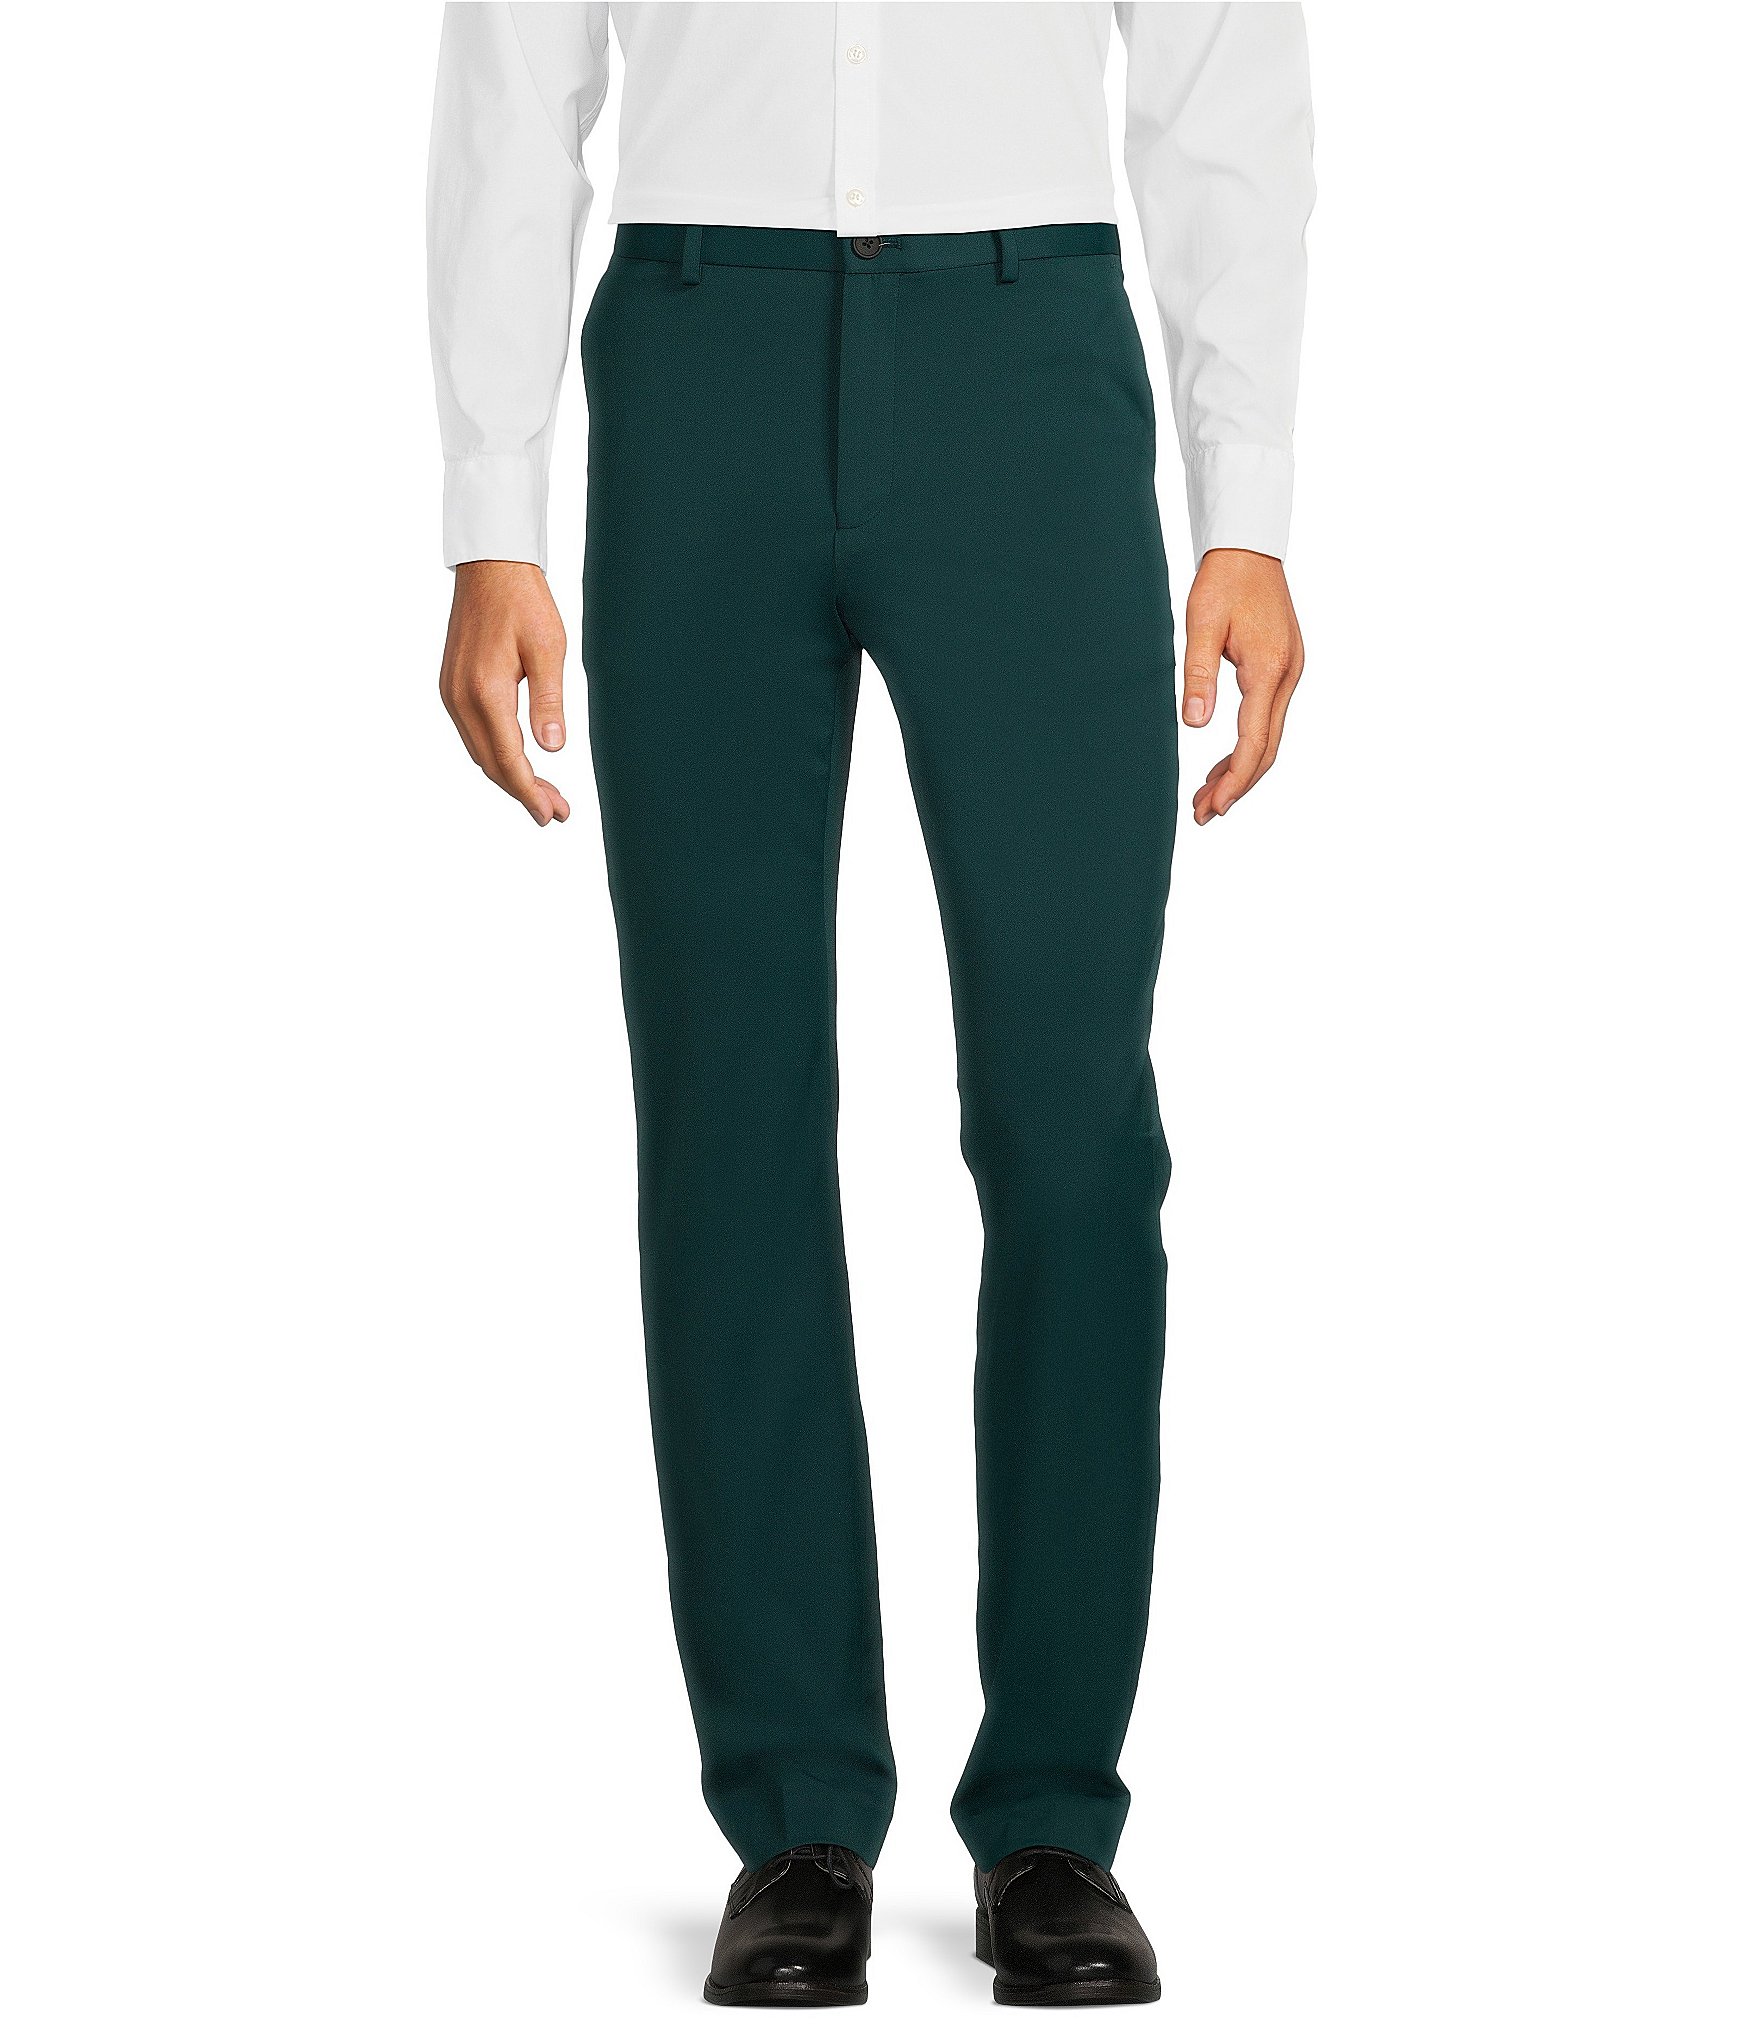 Green Slim Fit Business Mens Formal Pants Style For Men 2020 Fashionable  Streetwear Solid Suit From Kenneth333, $20.46 | DHgate.Com